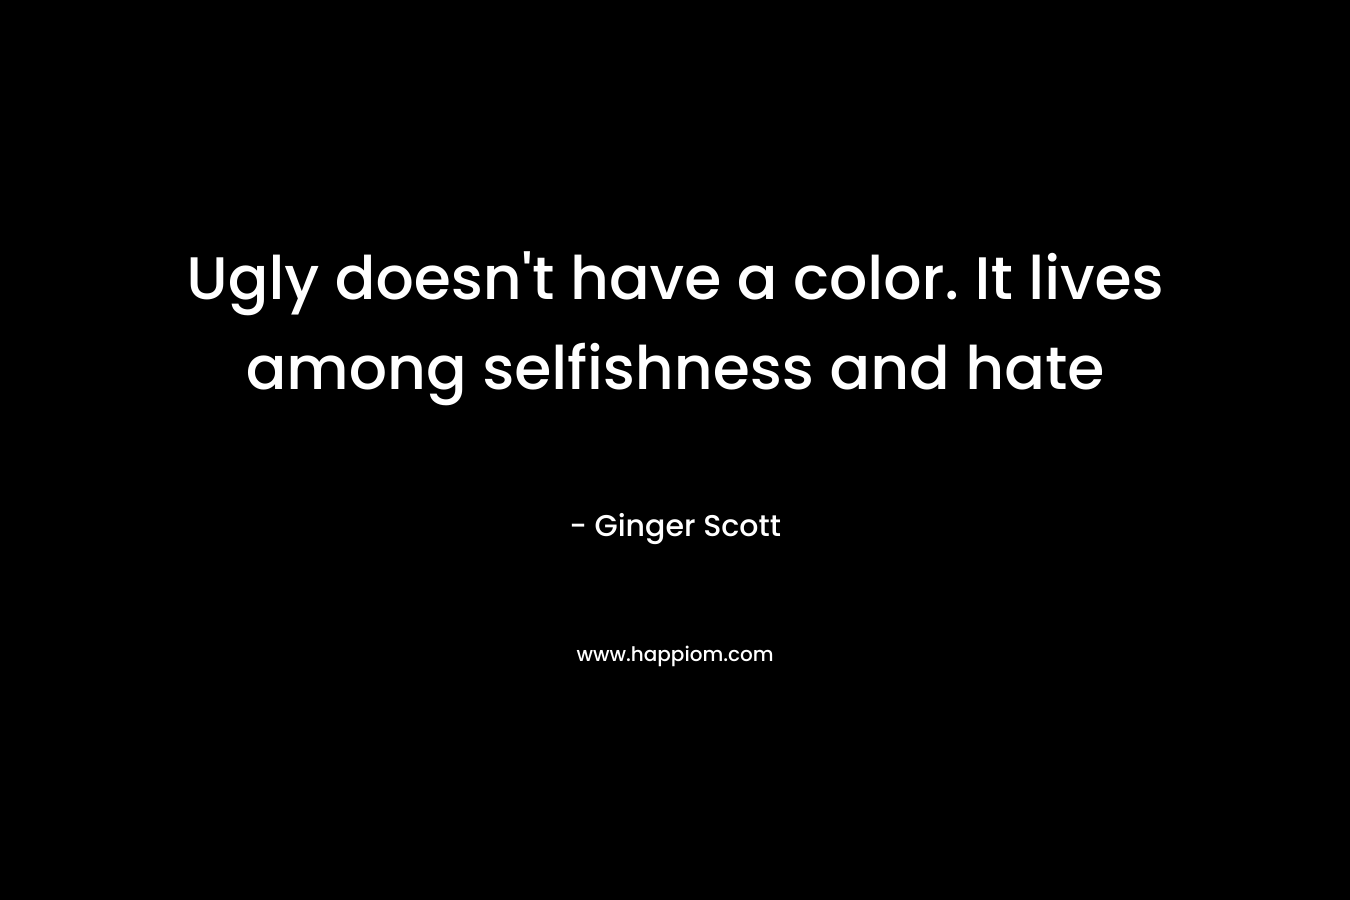 Ugly doesn't have a color. It lives among selfishness and hate